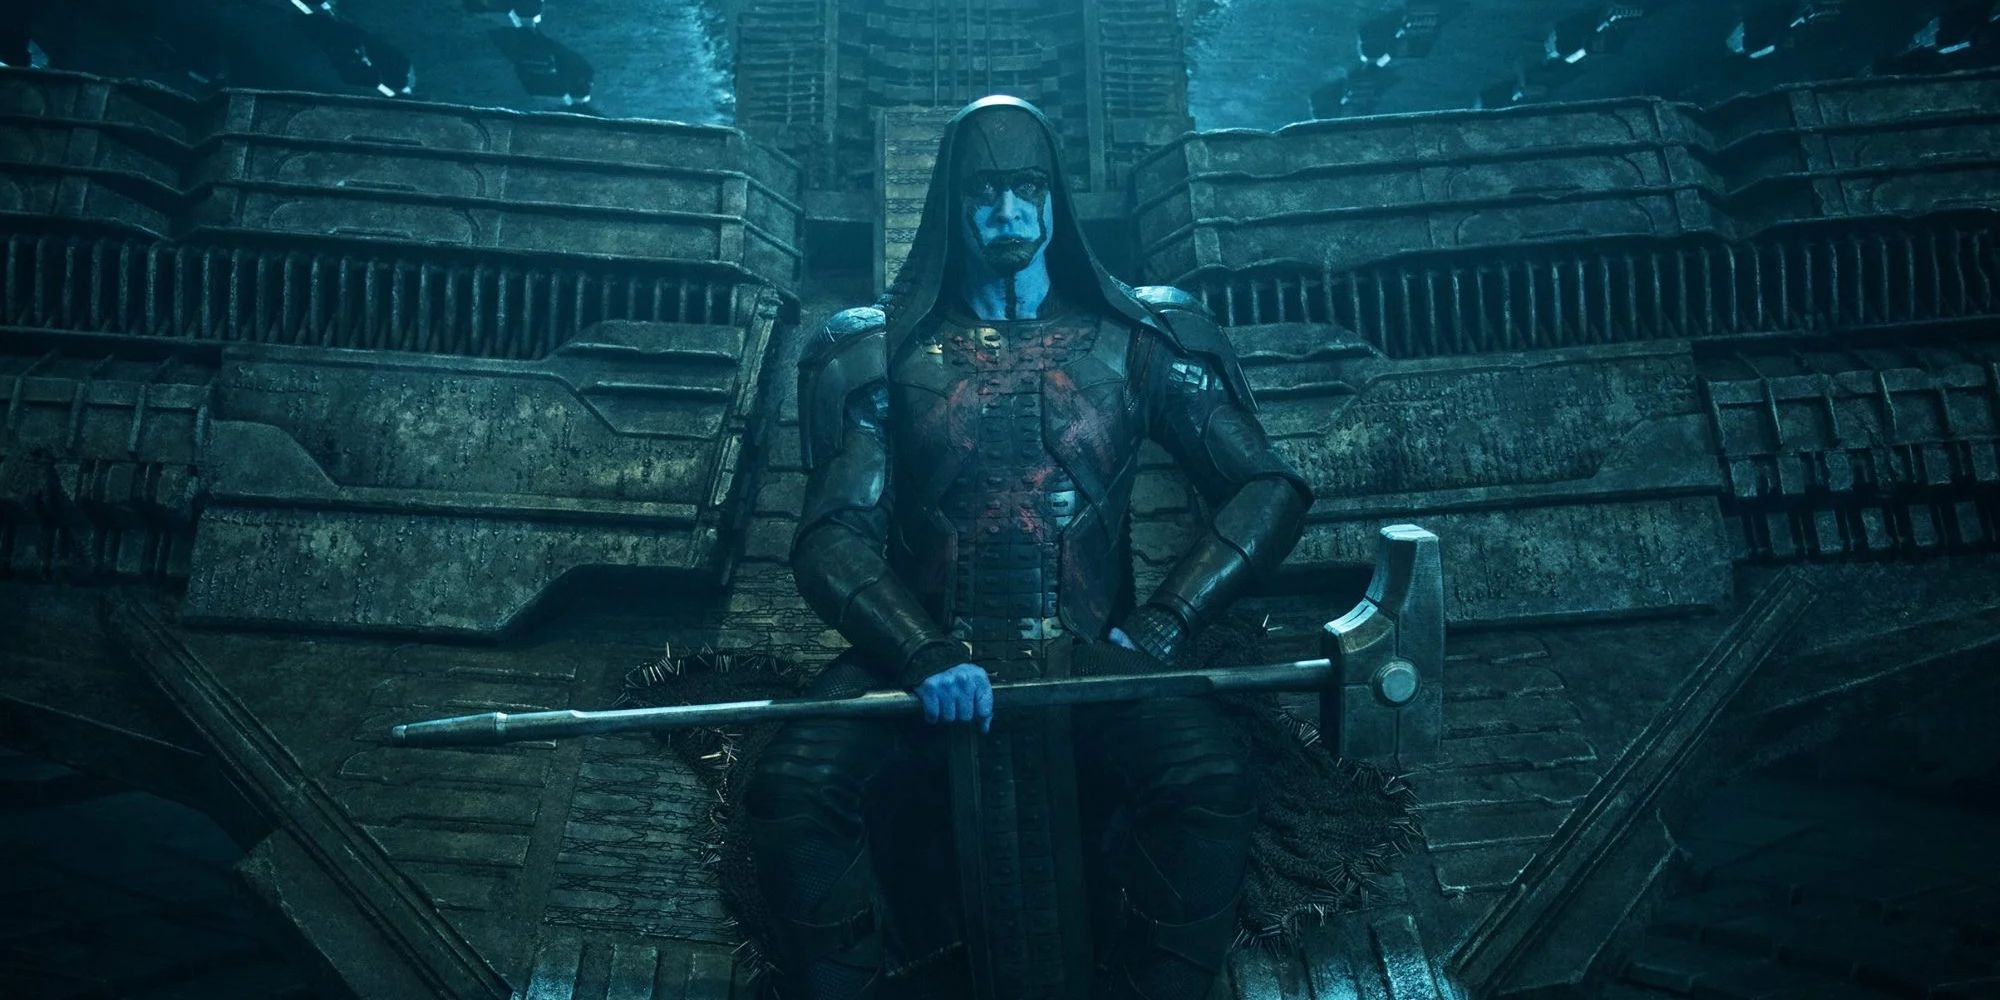 Ronan the Accuser, sitting in his throne holding his hammer in Guardians of the Galaxy